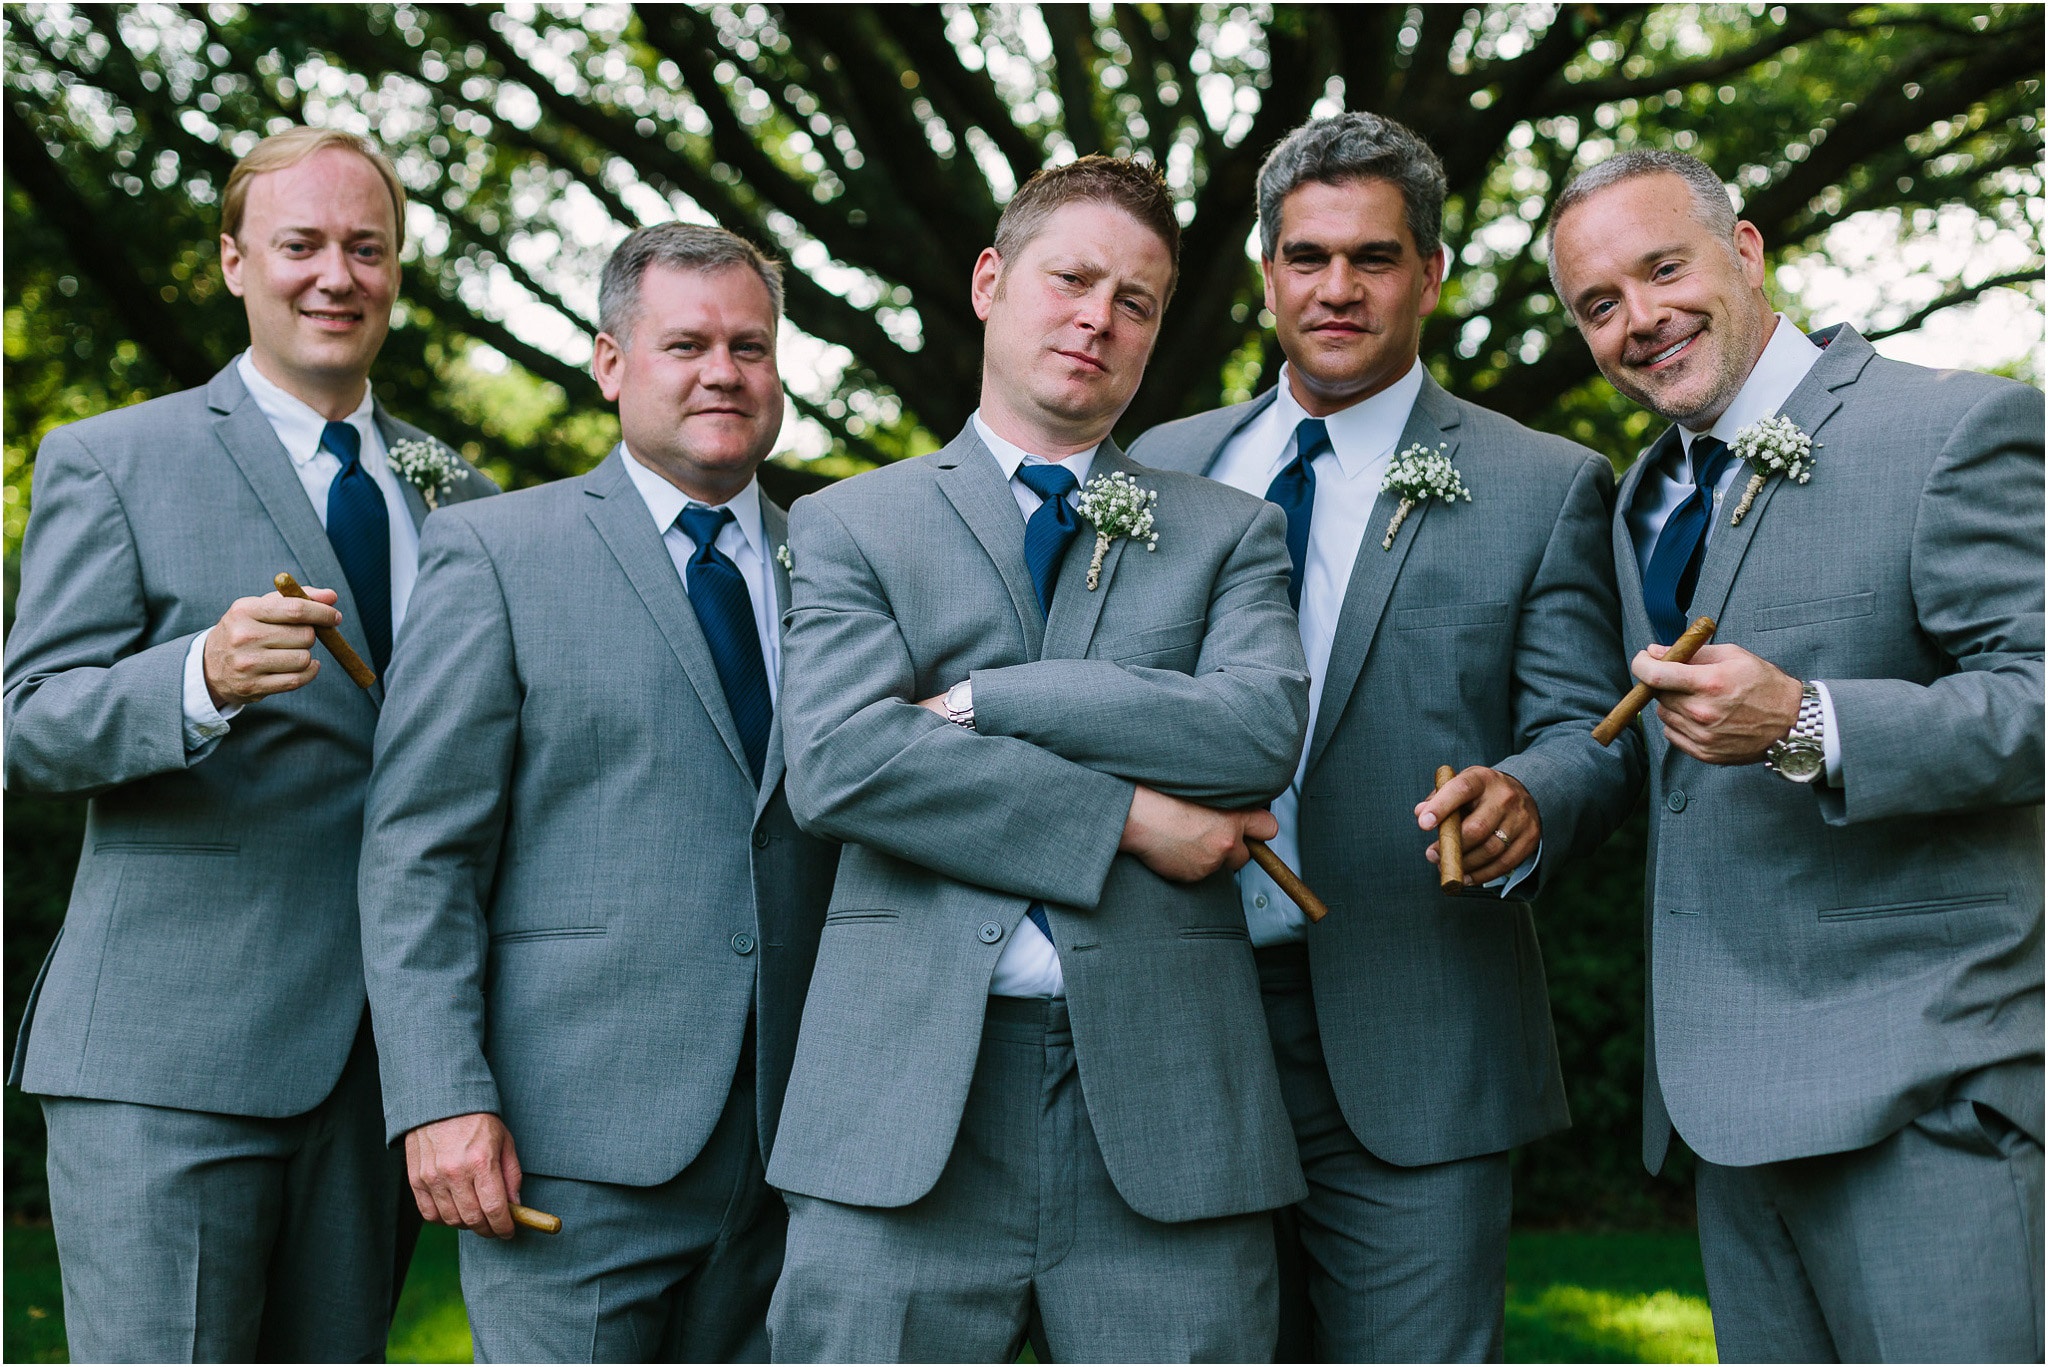 The Groom, The Groomsmen, and some cigars